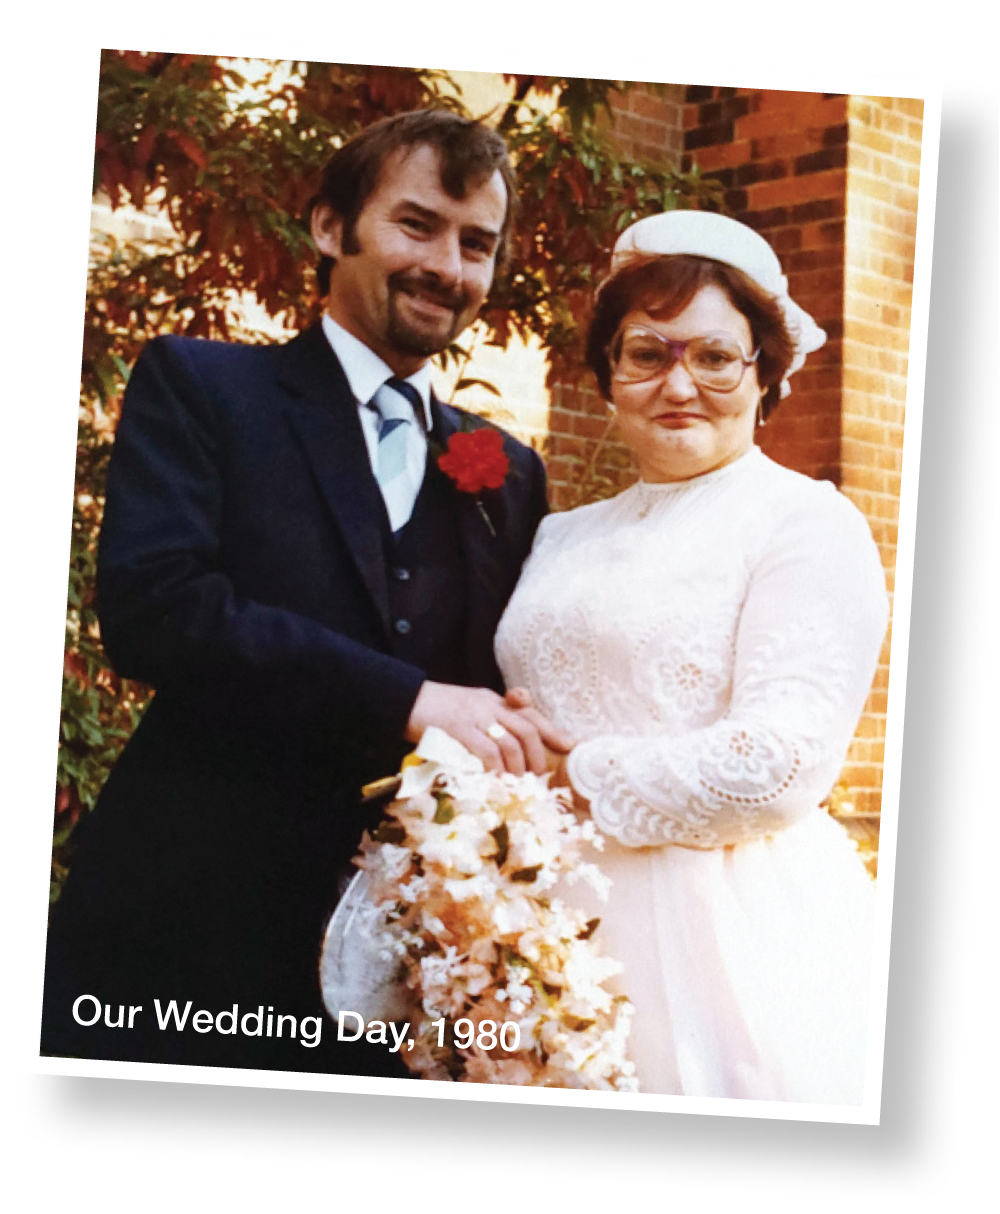 Les and Bill on their wedding day - poverty appeal